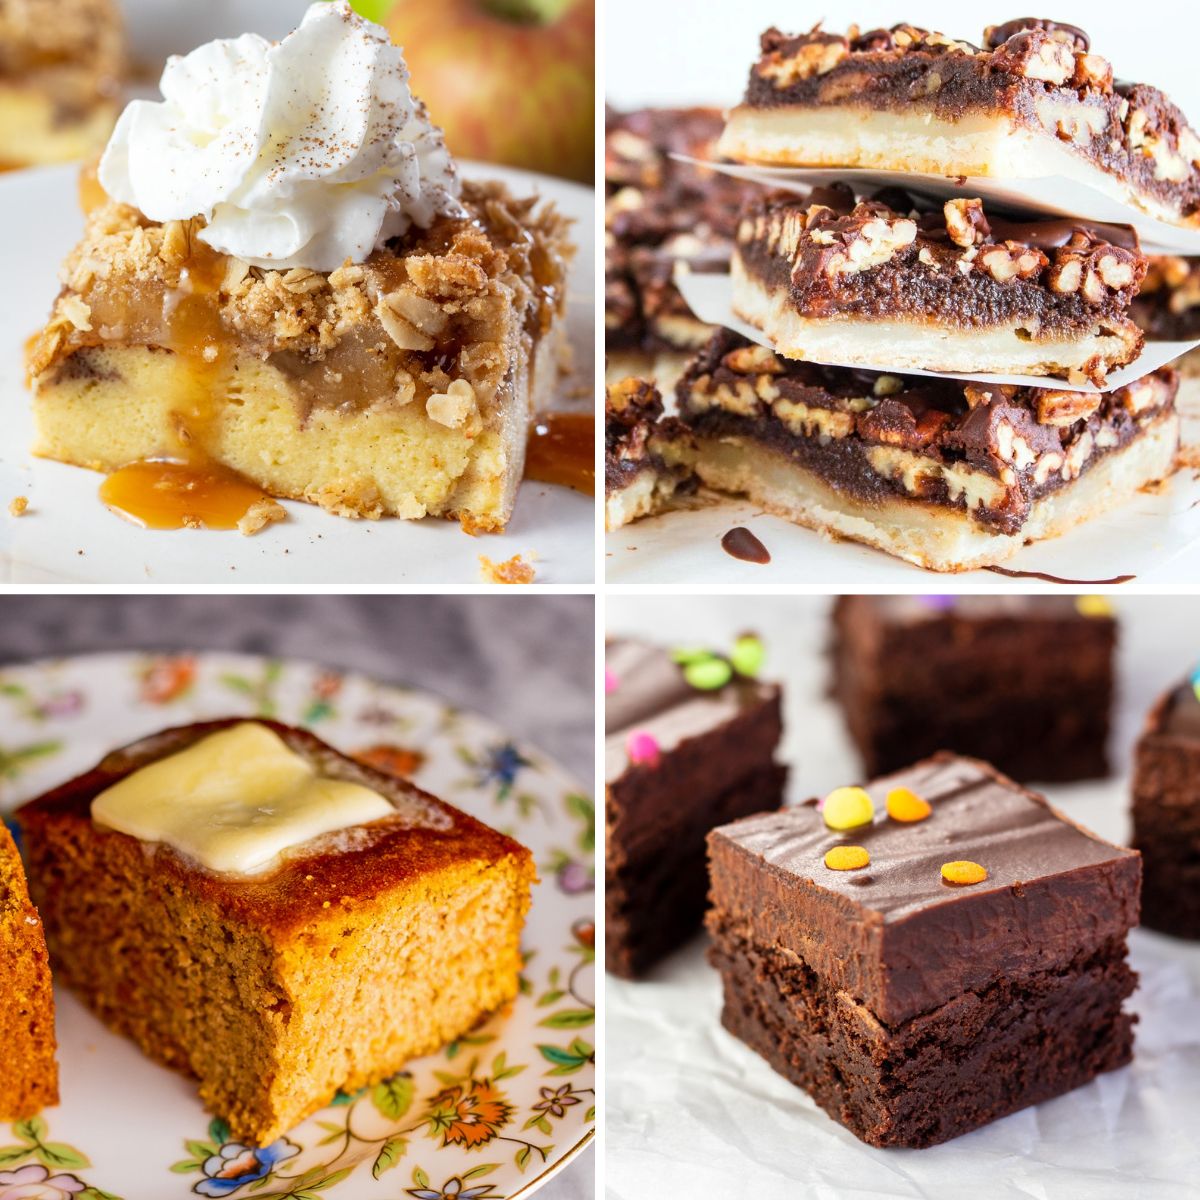 What is a tray bake and why are they popular illustrated with 4 tasty recipes baked in pans.